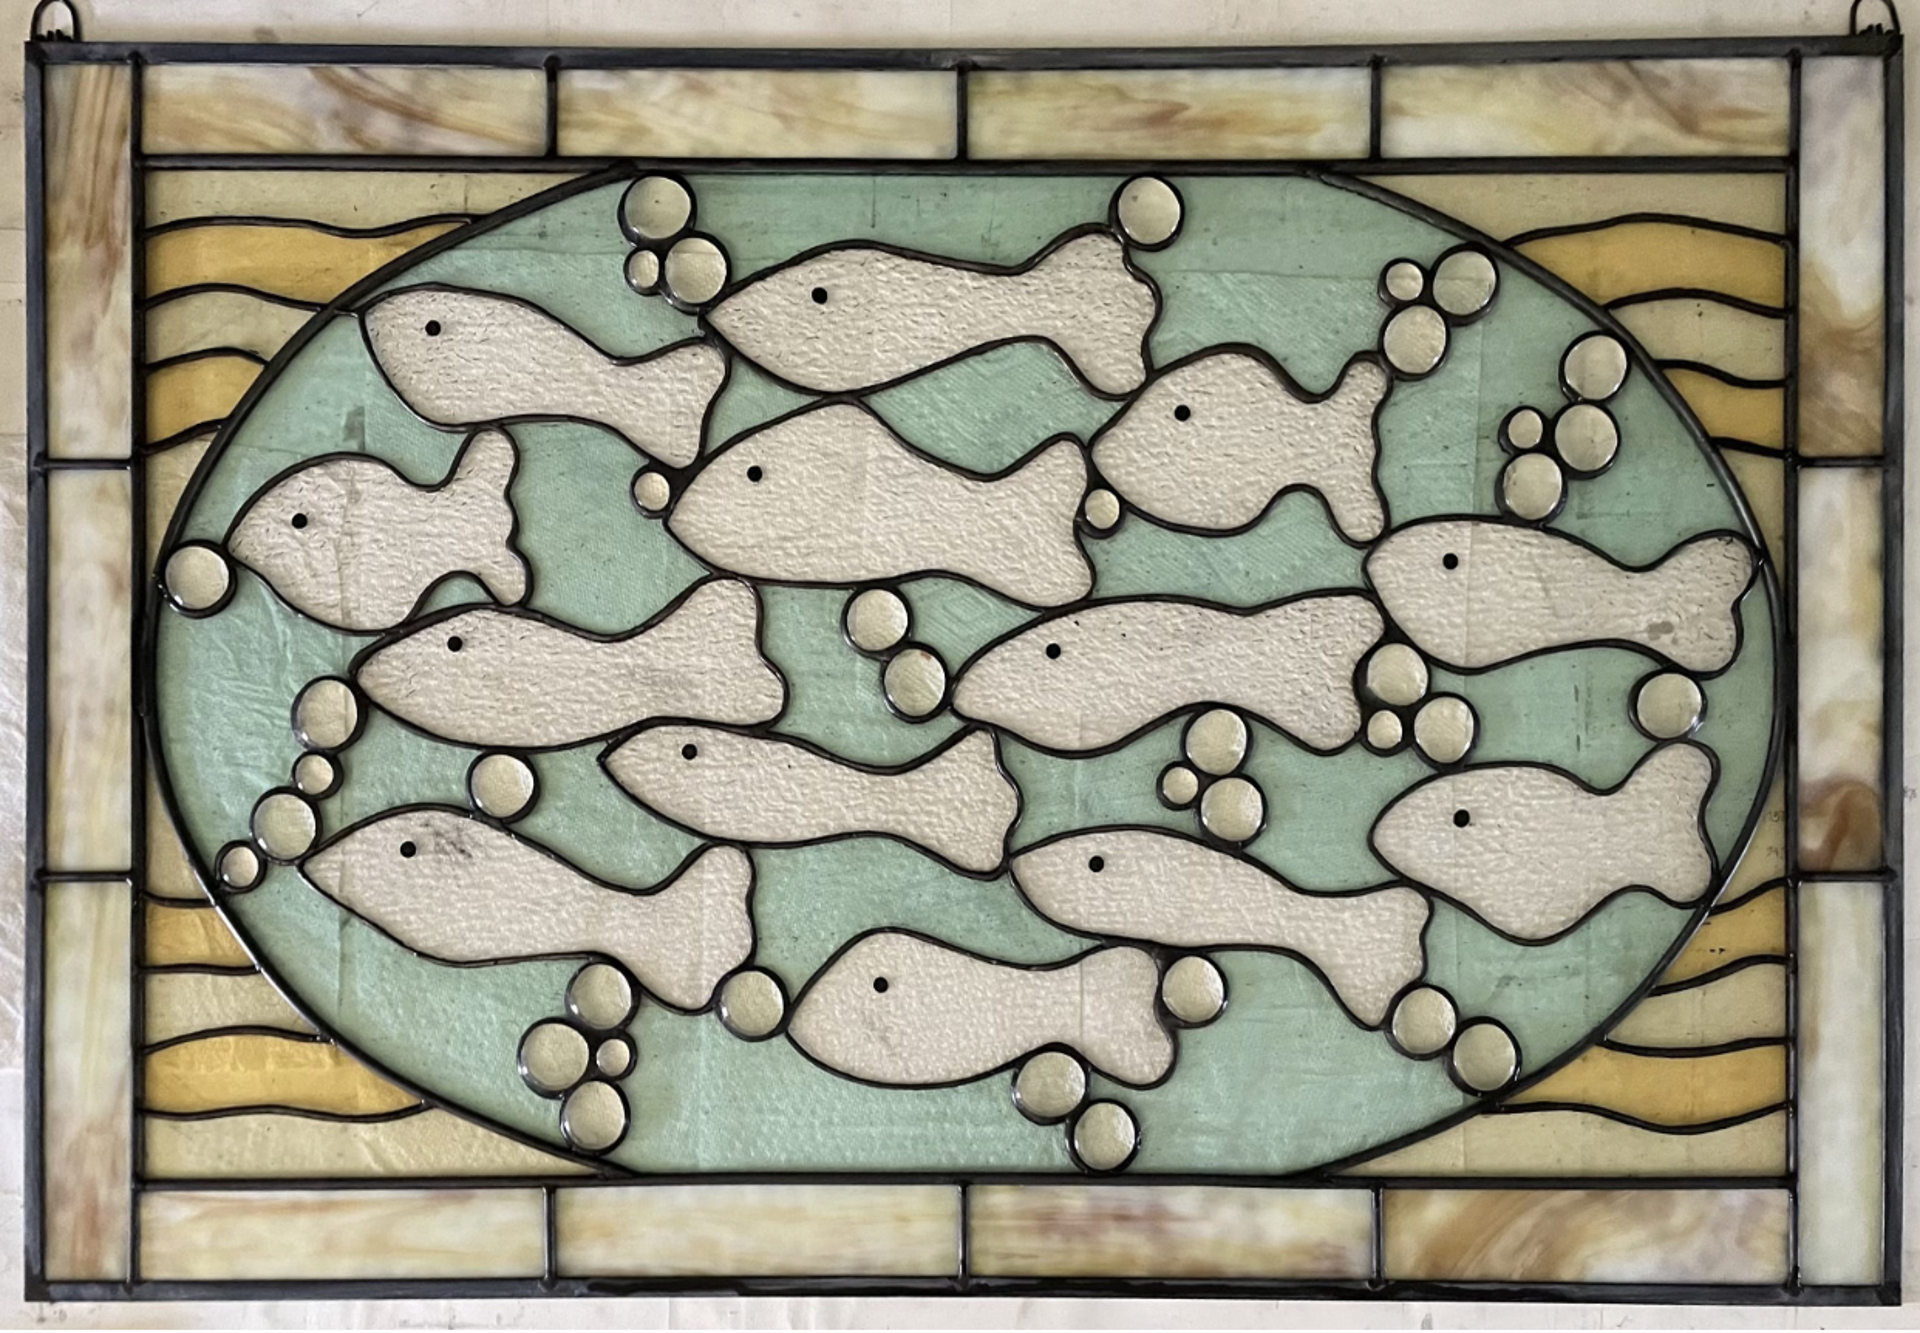 Fish in a Bowl Stain Glass Commission by John Schumacher